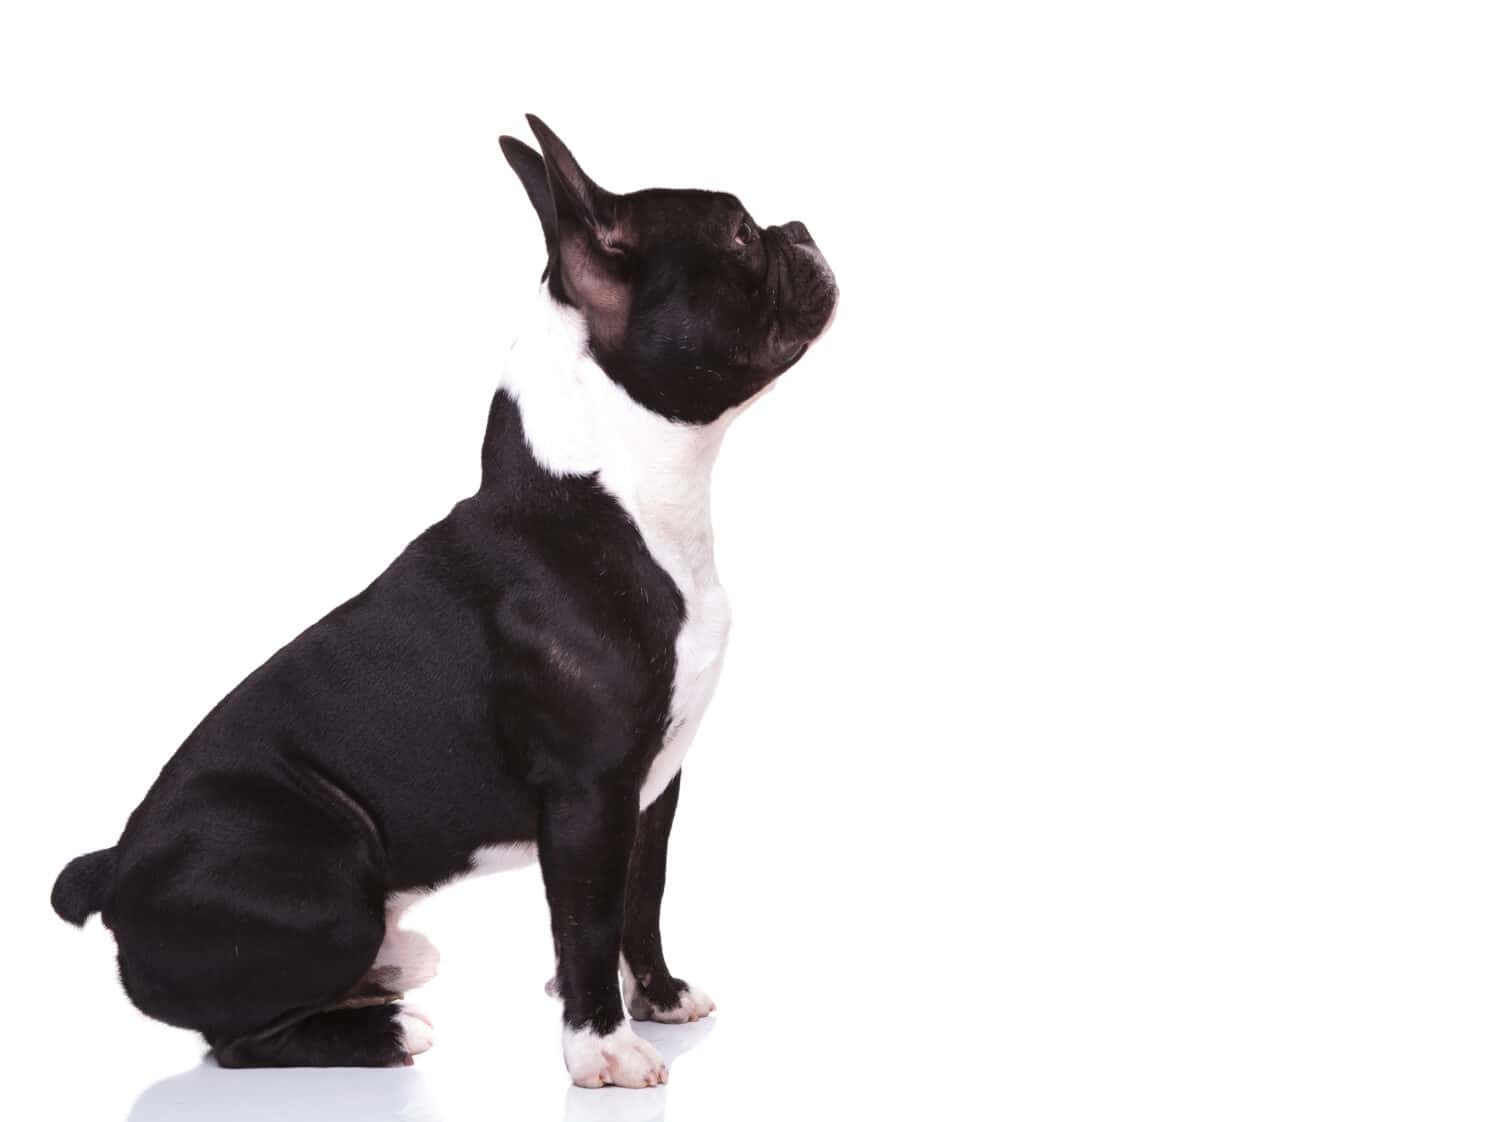 side view of a curious french bulldog puppy dog looking up to something, isolated on white background